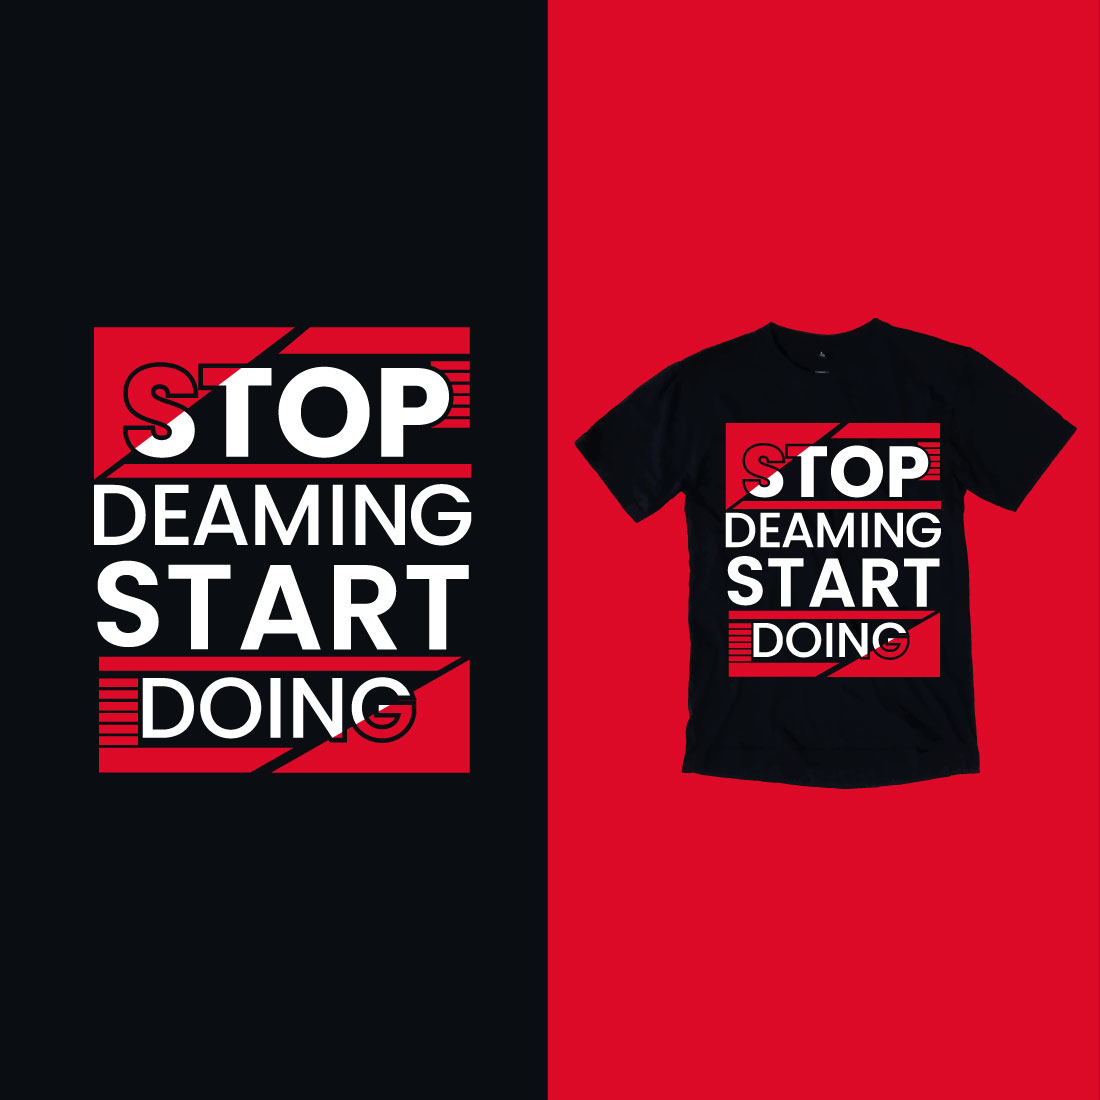 T - shirt that says stop dreaming start doing.